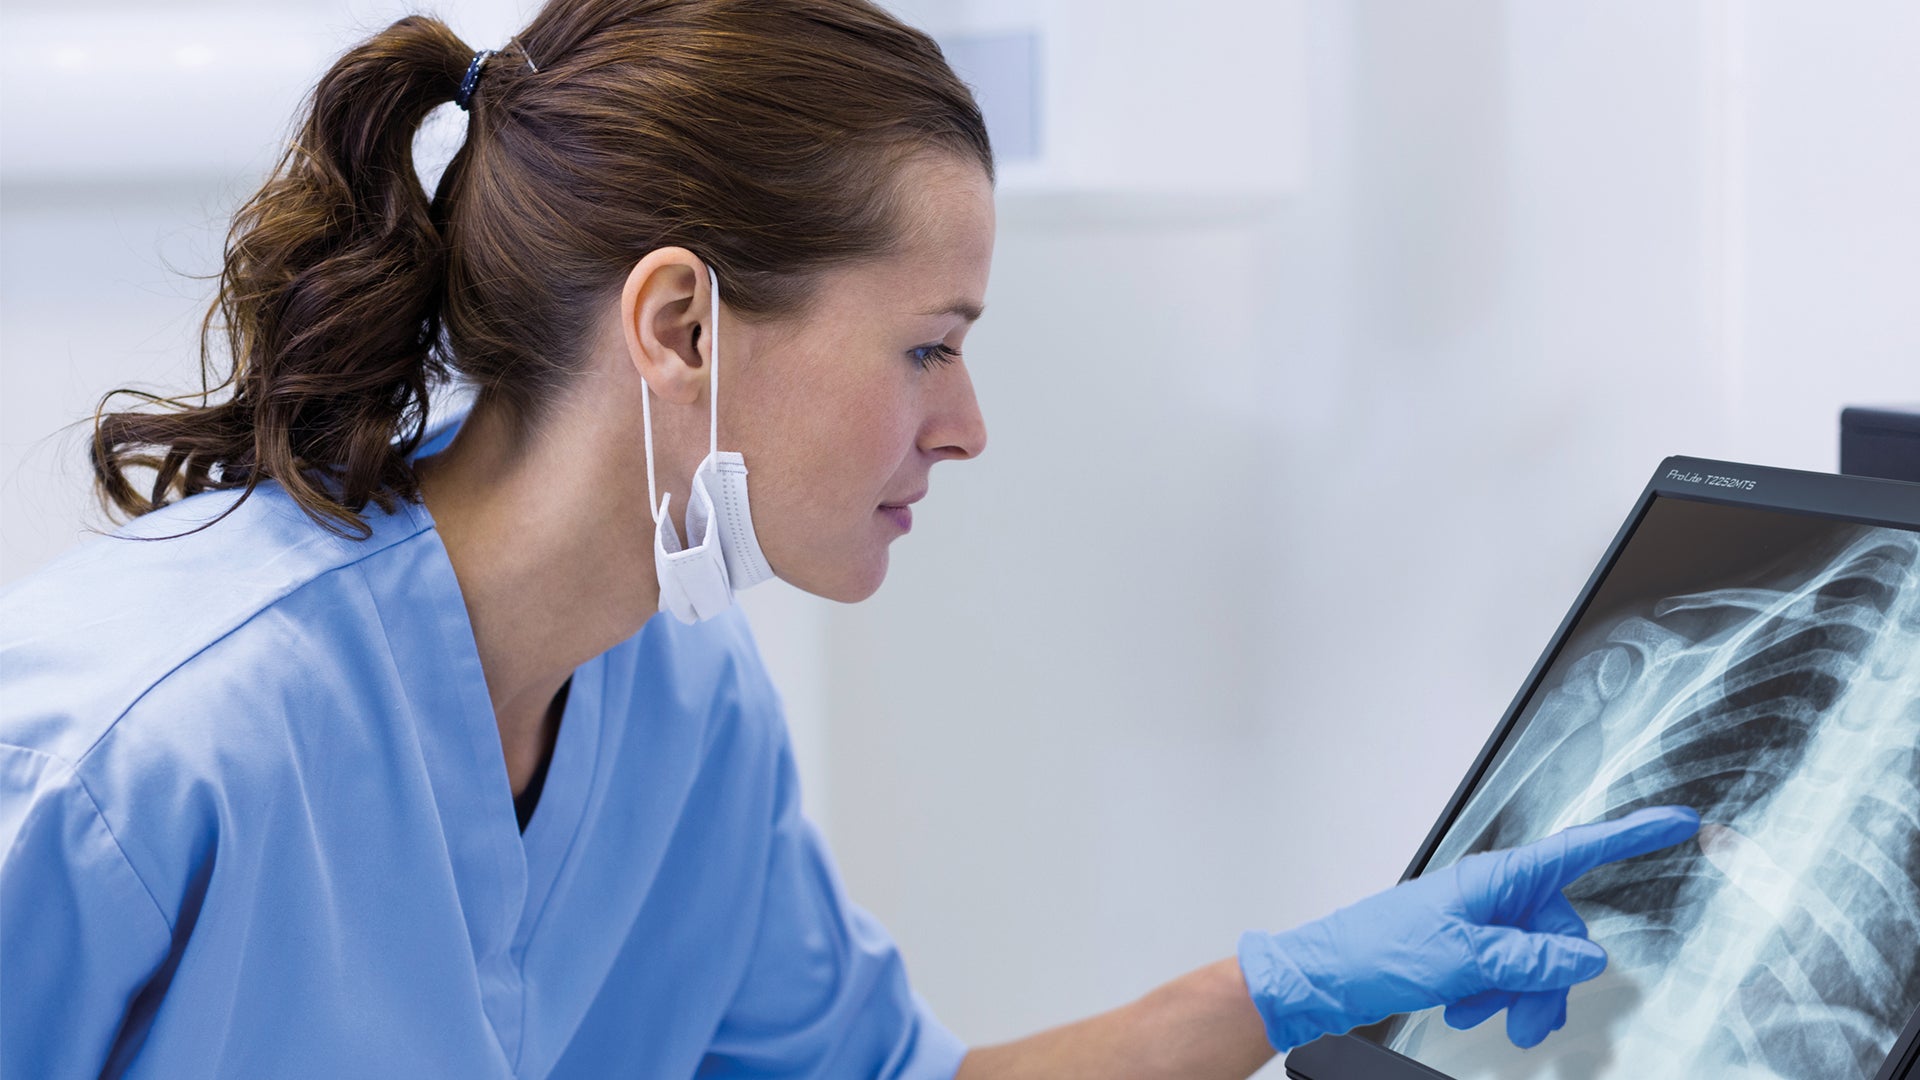 What Is The Best Medical Touch Screen Monitor for Healthcare Professionals?